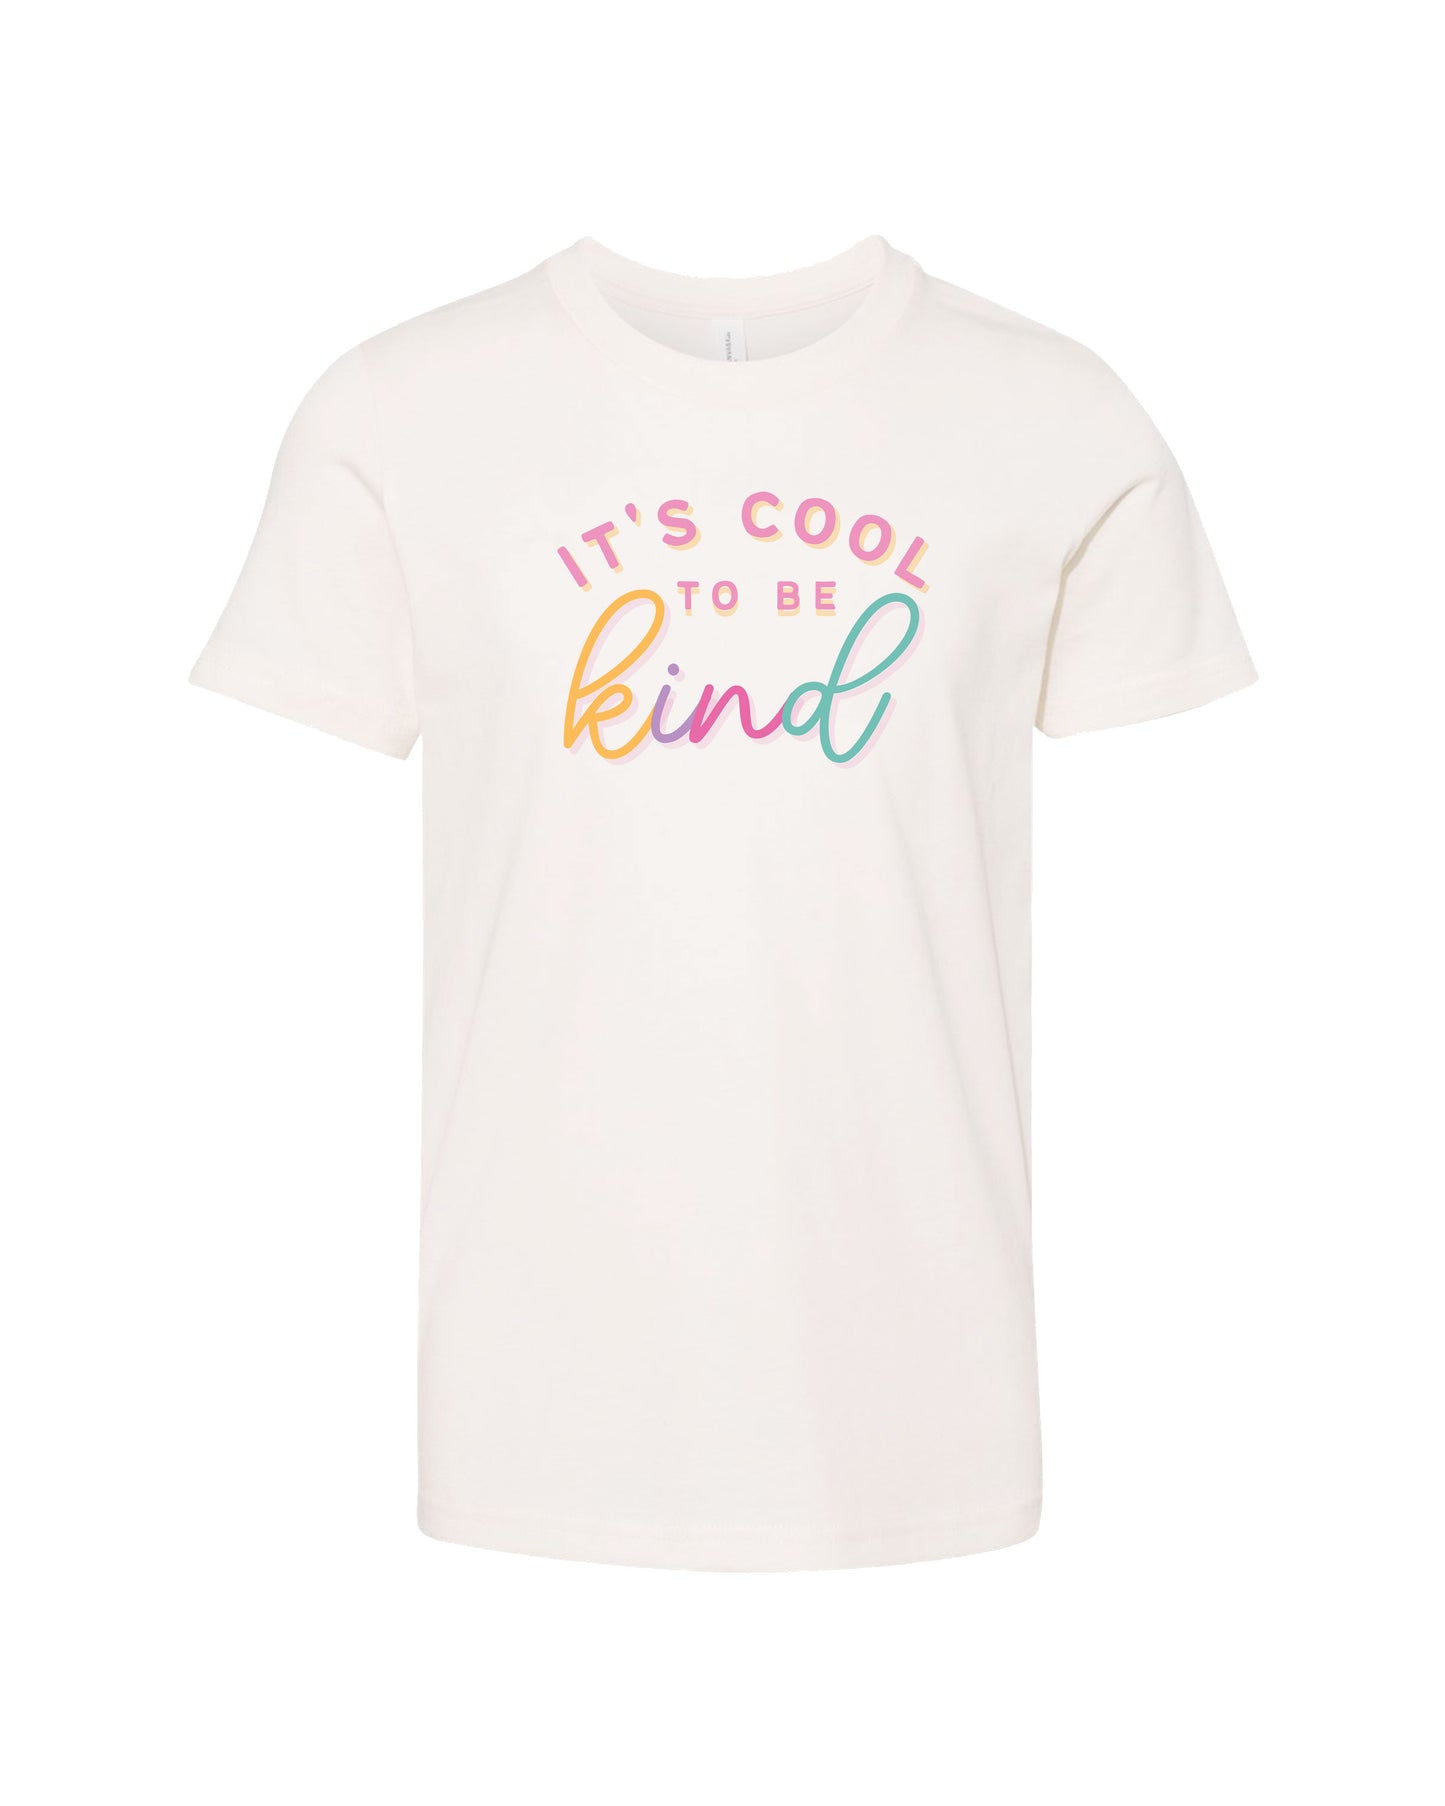 Cool to be Kind | Girls Tee-Kids Tees-Sister Shirts-Sister Shirts, Cute & Custom Tees for Mama & Littles in Trussville, Alabama.